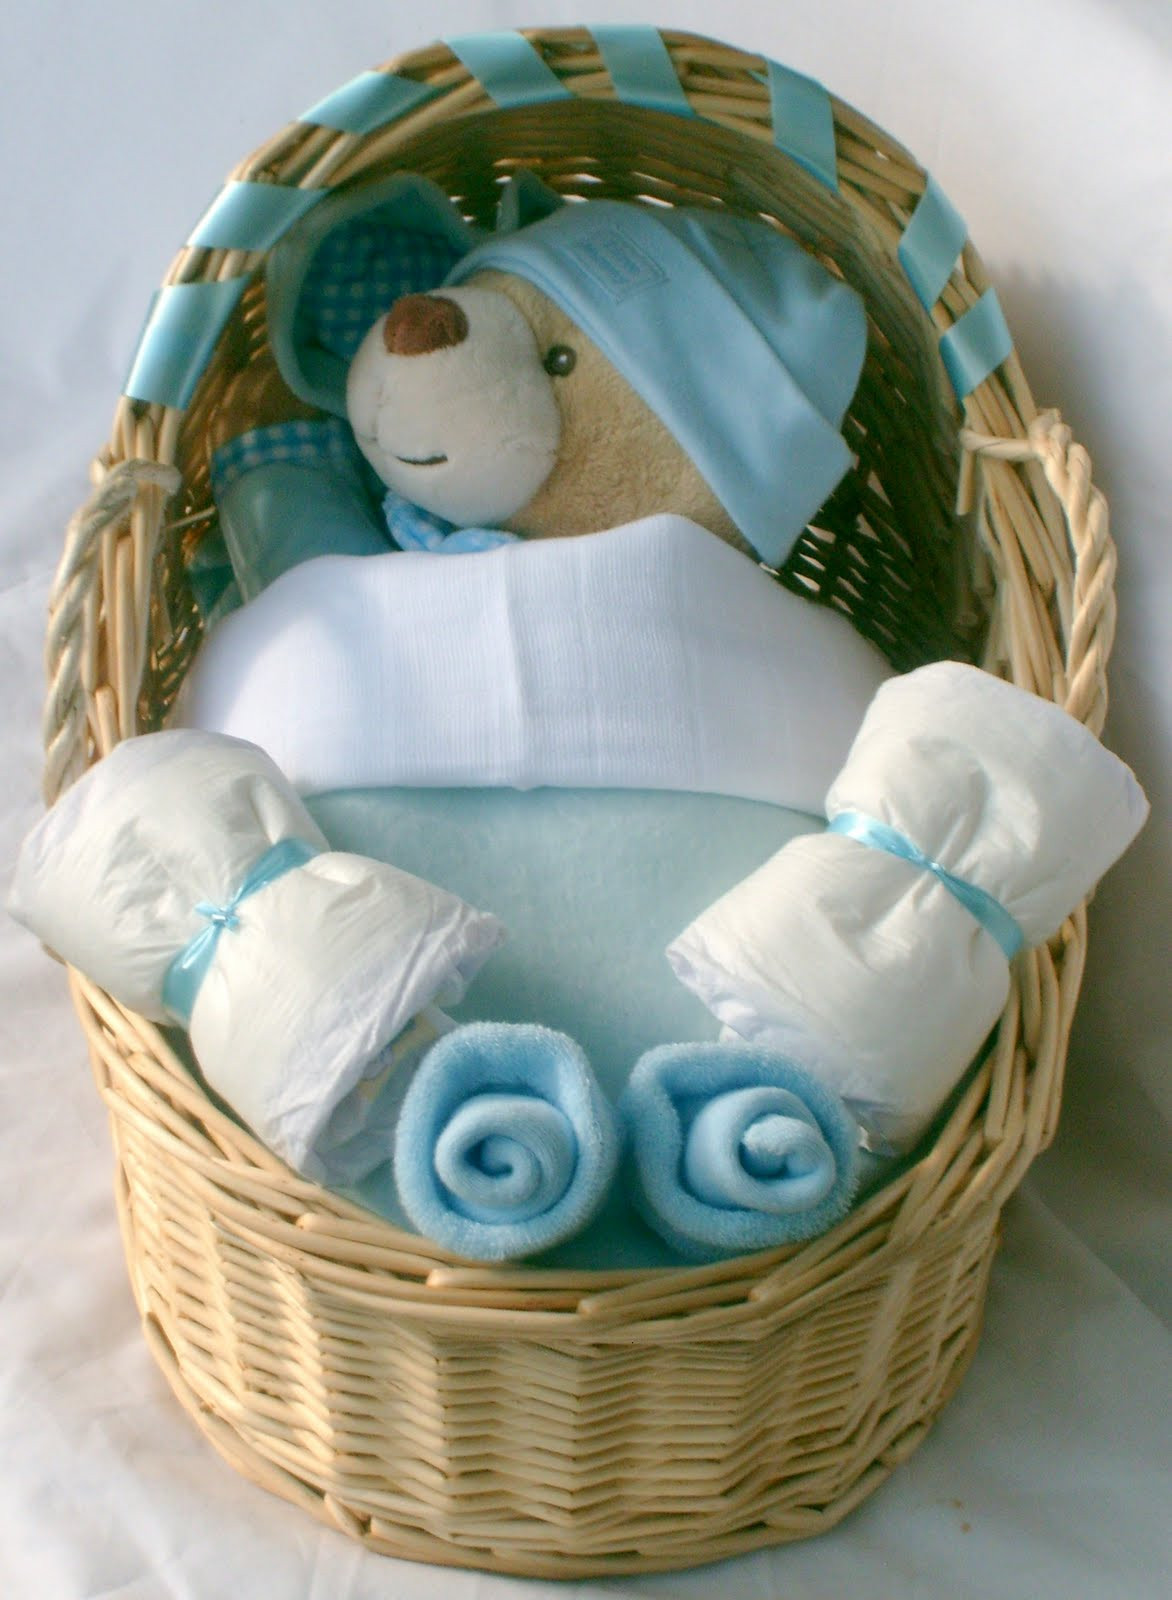 Baby Gift Baskets
 New Baby Gift Baskets